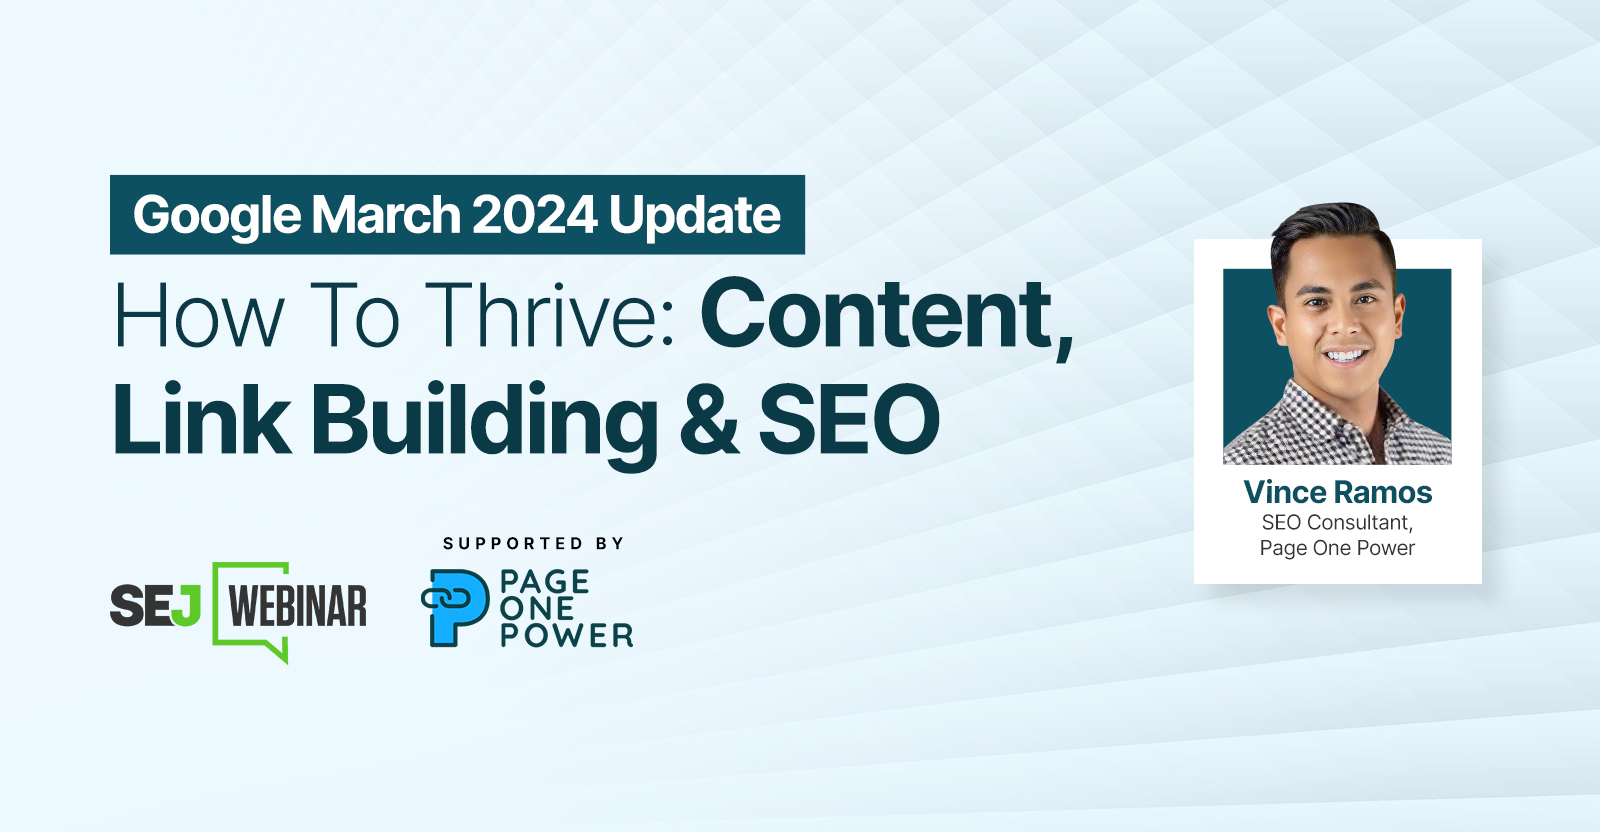 [Google March 2024 Update] How To Thrive: Content, Link Building & SEO